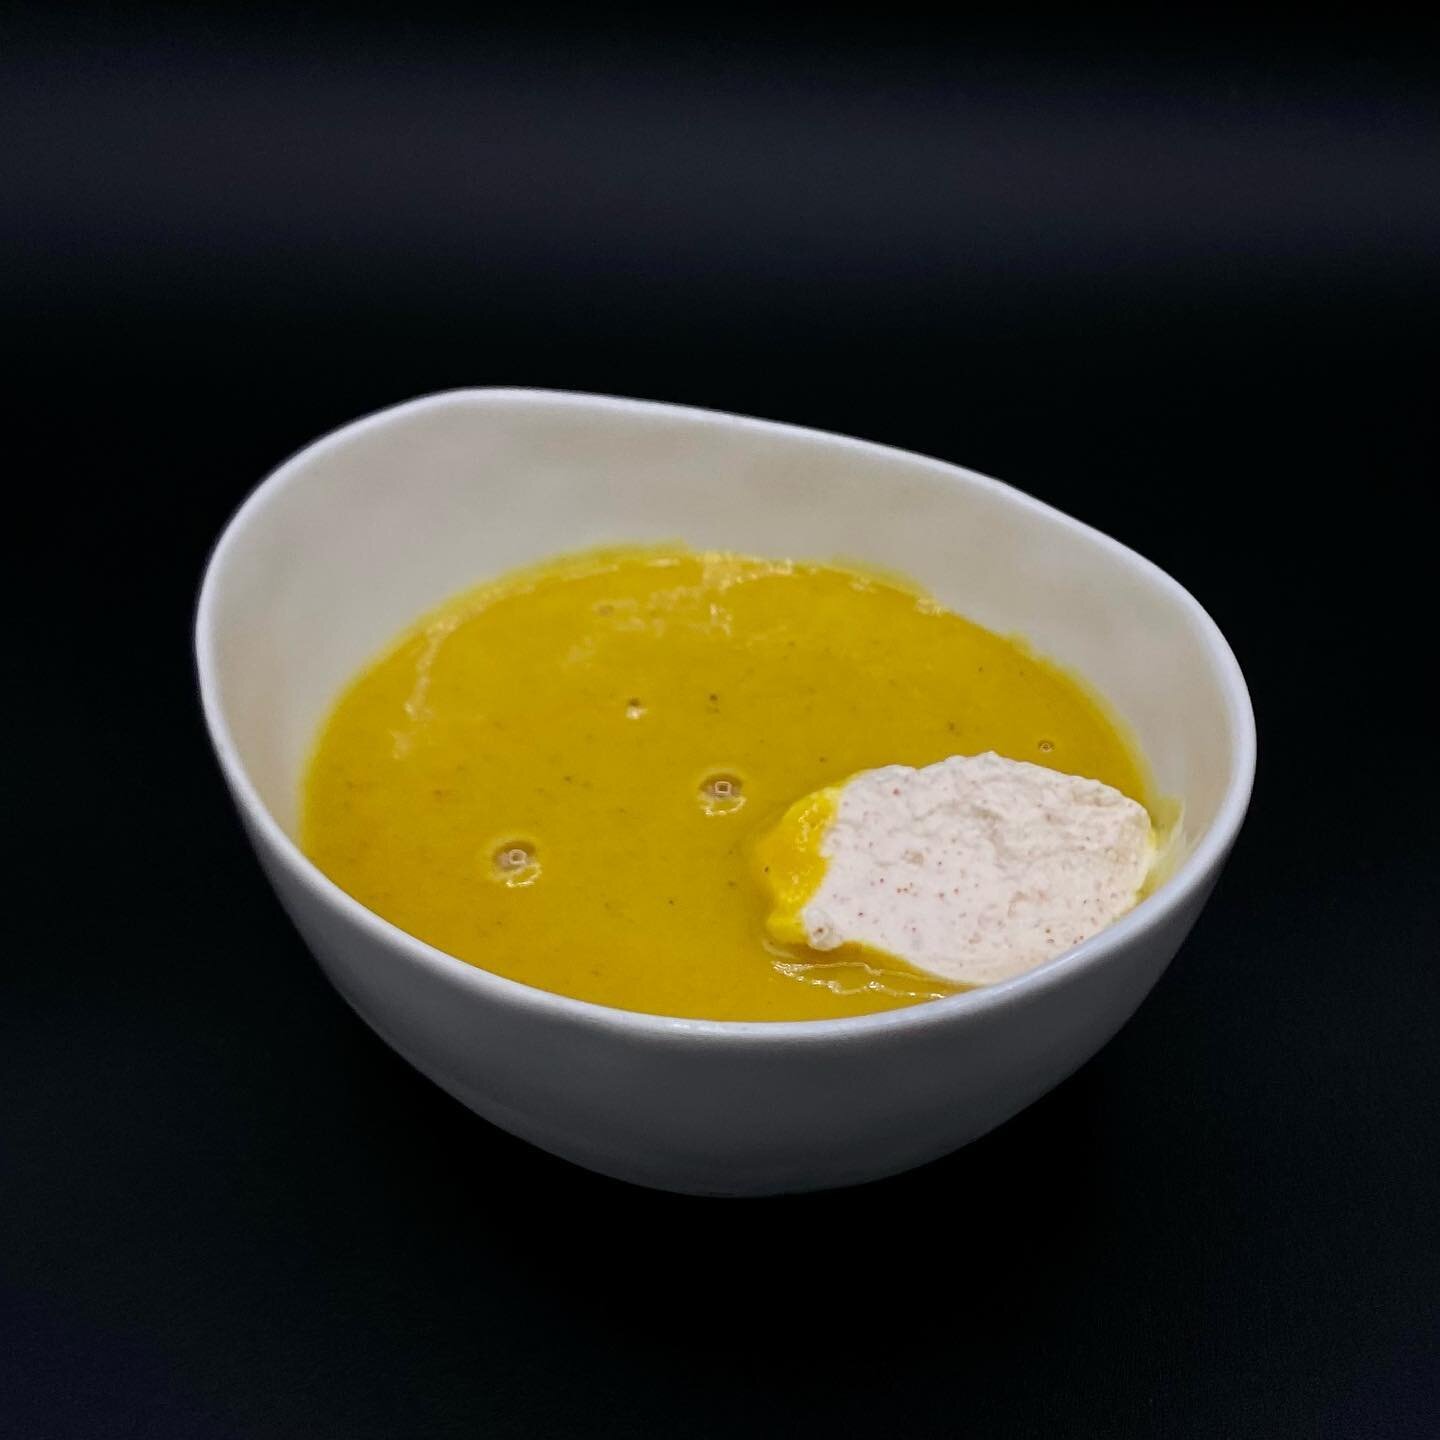 One of our most refreshing appetizers this month is our Chilled Curried Peach Soup with Cayenne Whipped Cream. Have you had the chance to give this a taste? Let us know what you think in the comments! 🍑

☎️ Give us a call to make your reservation: 5